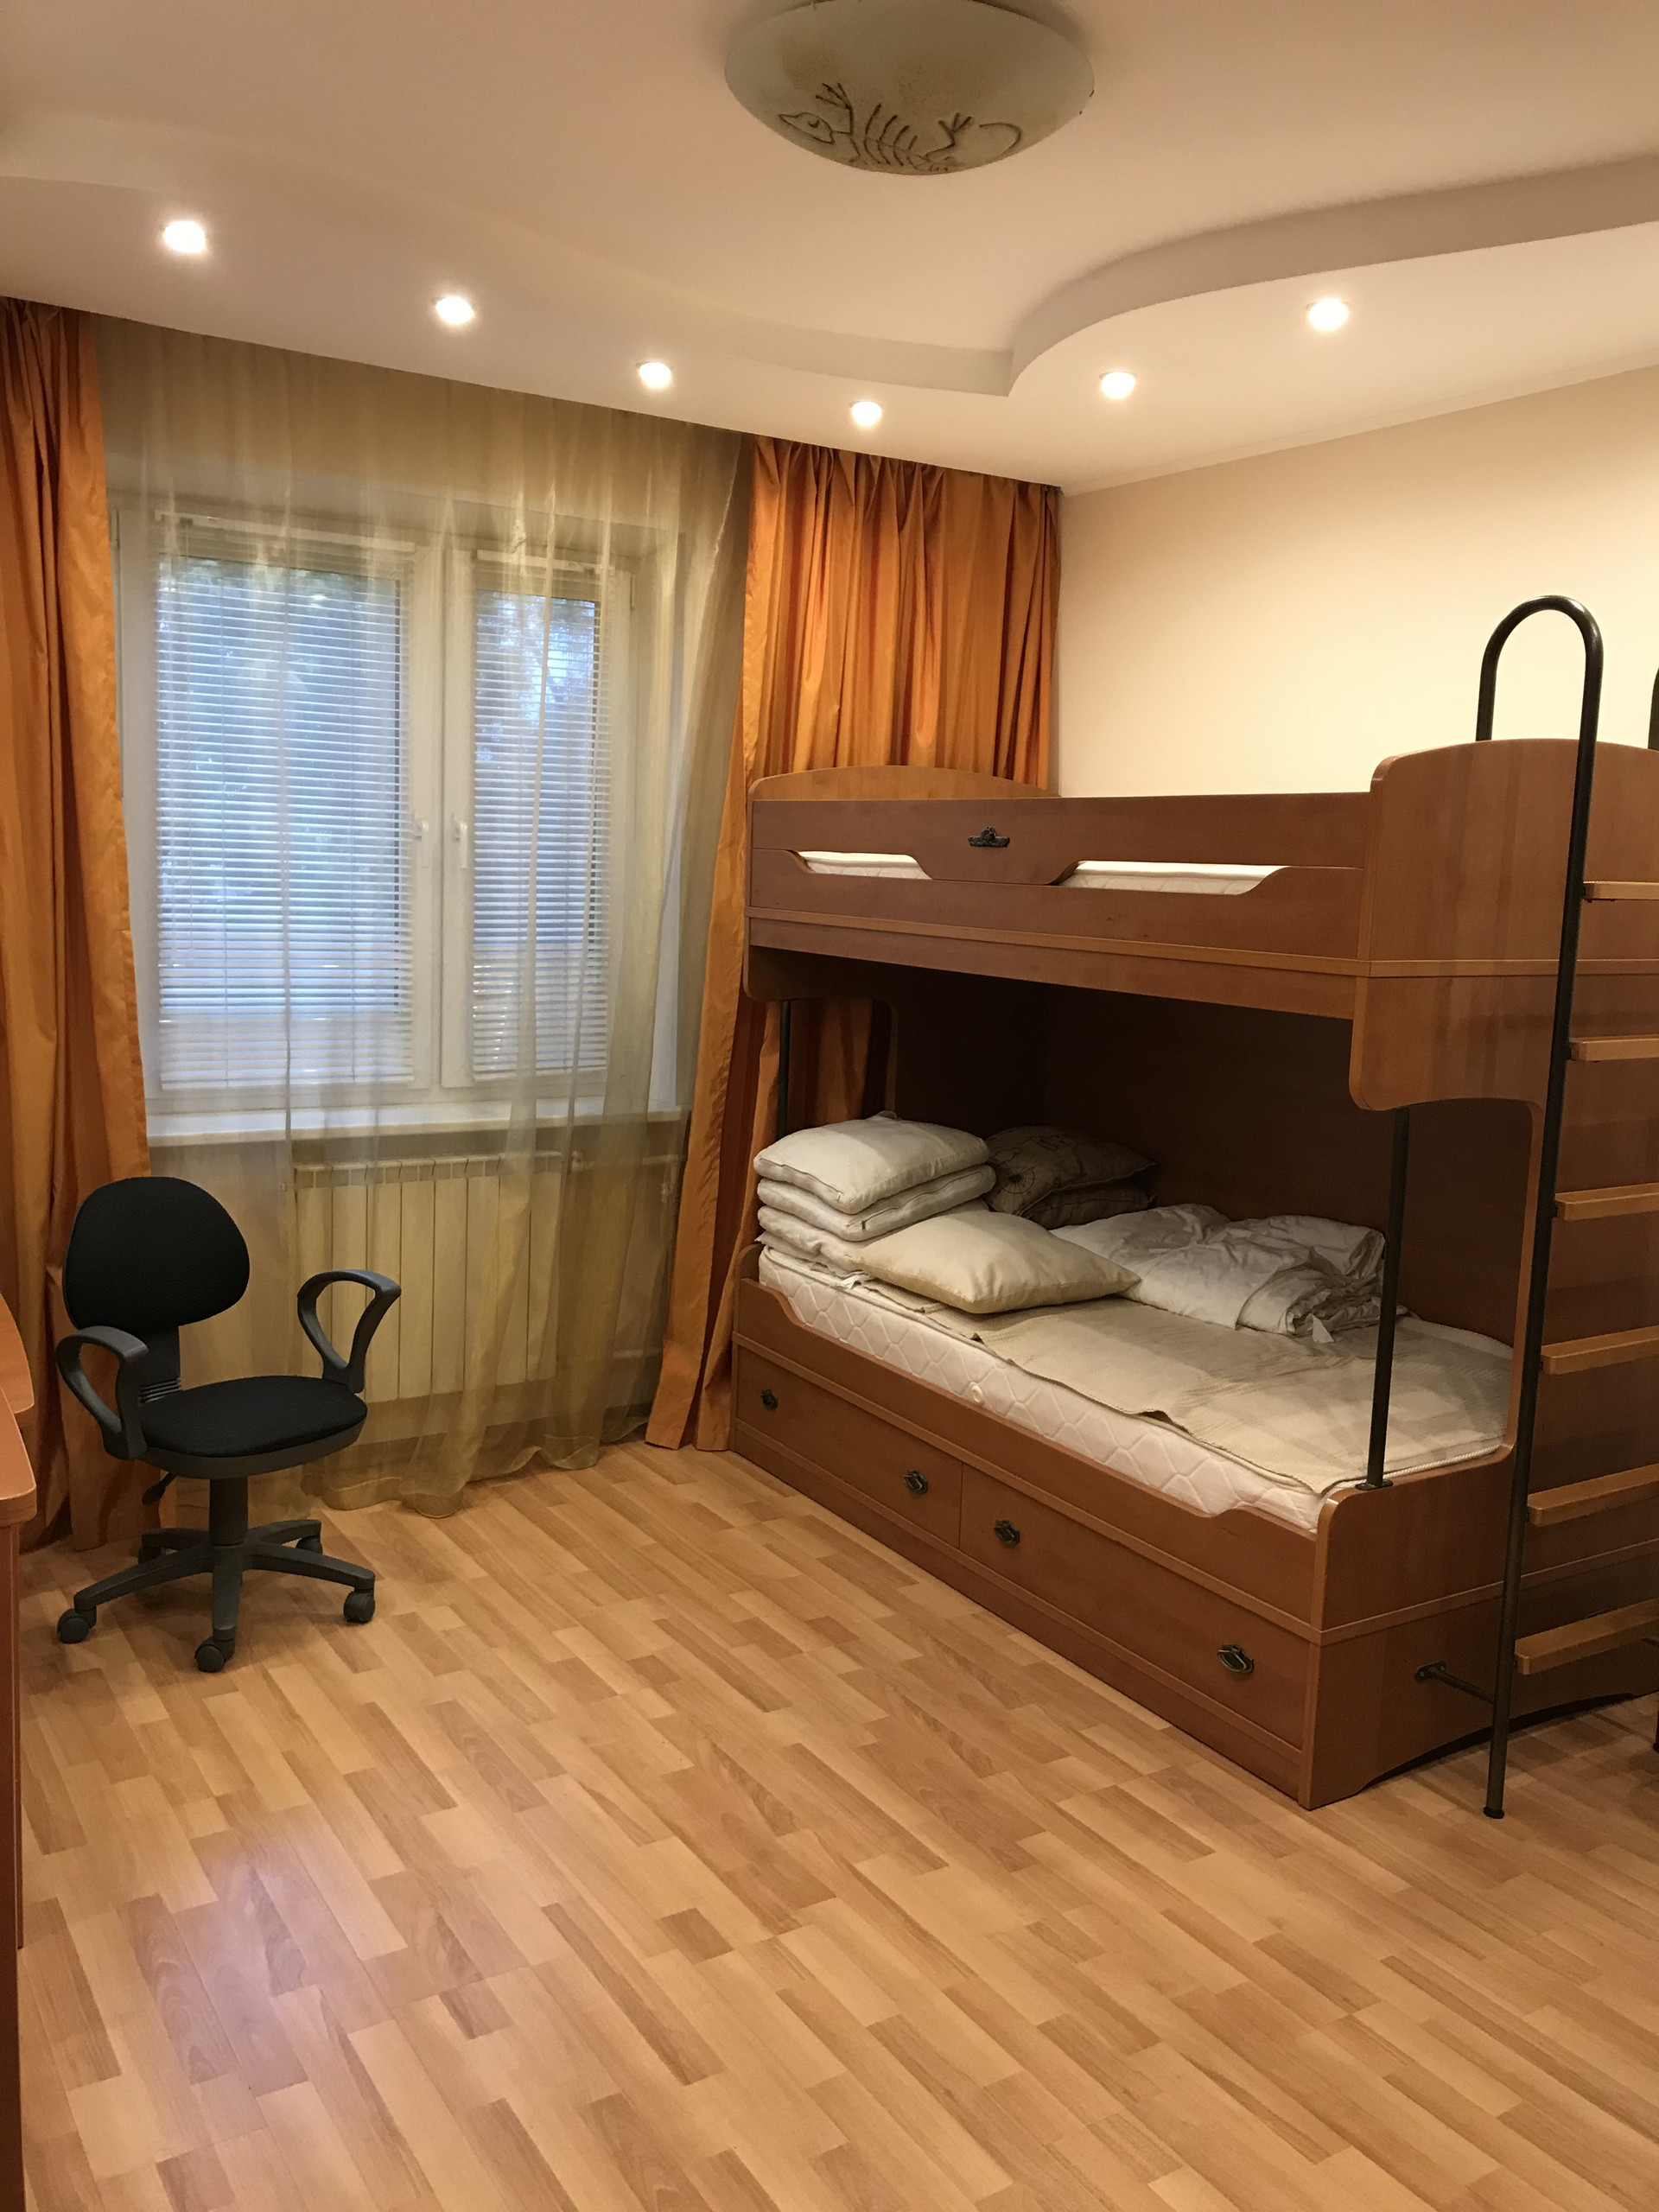 sale 2-room apartment in Moscow, 55 m²